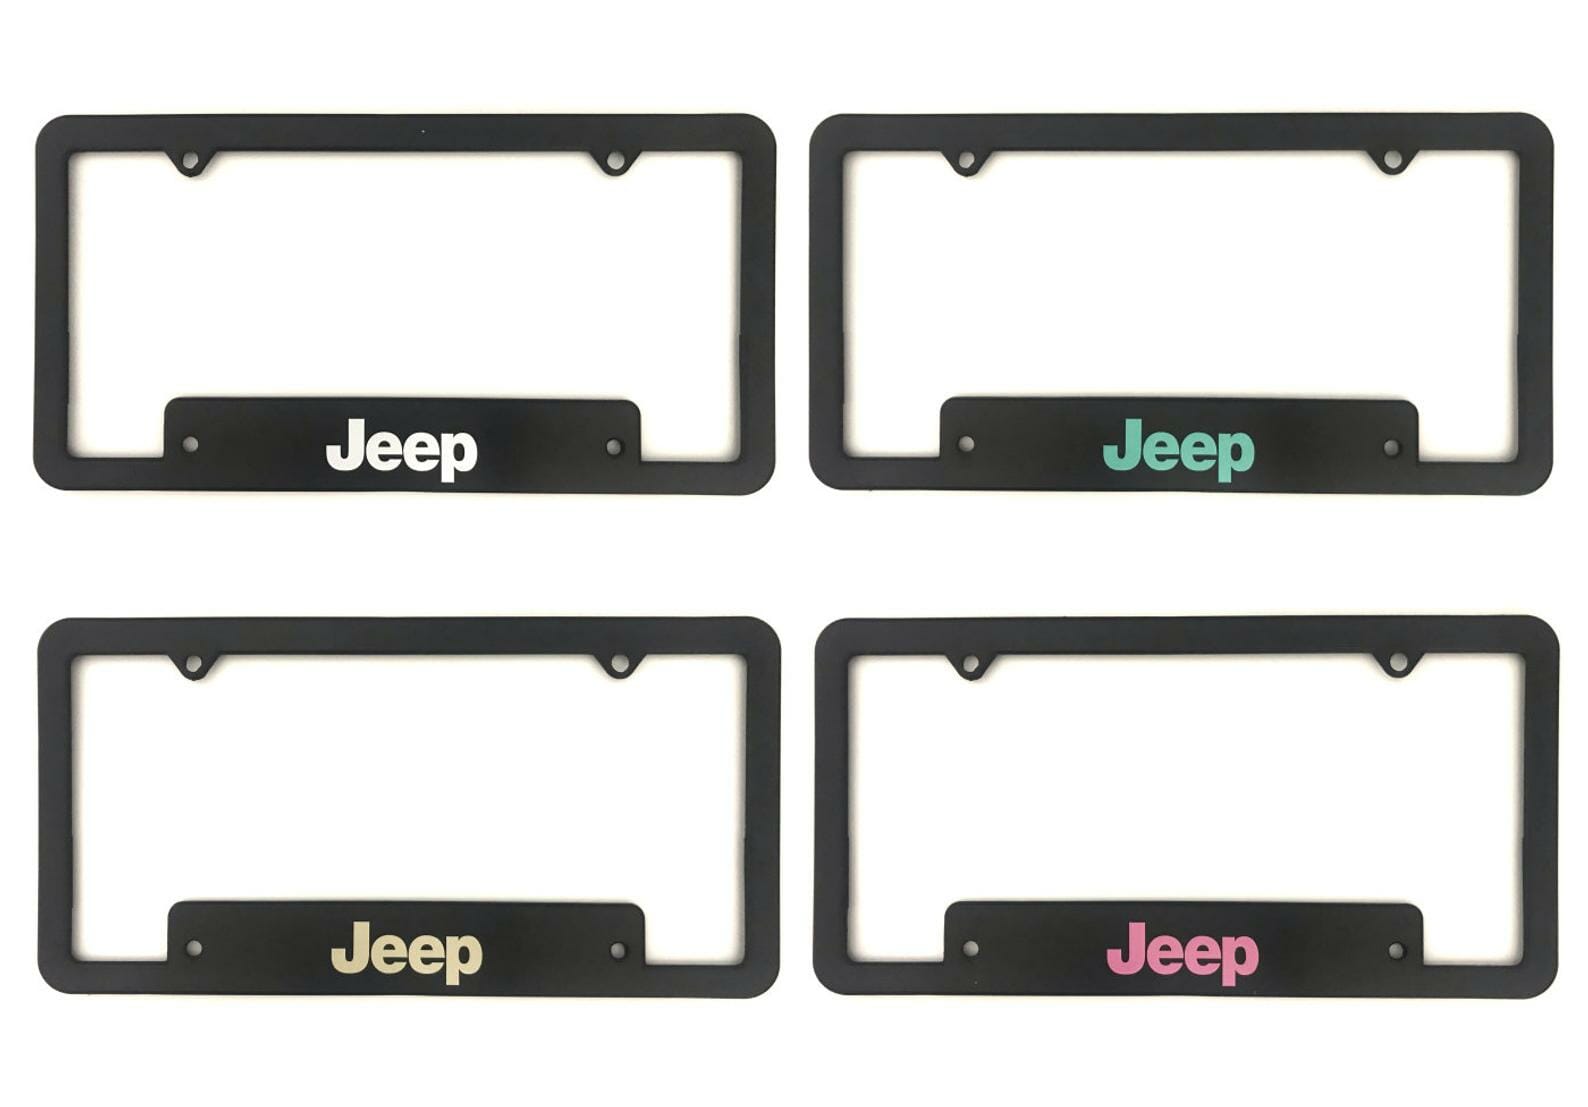 30 Great Creative Gifts for Jeep Owners - Best Choice Review